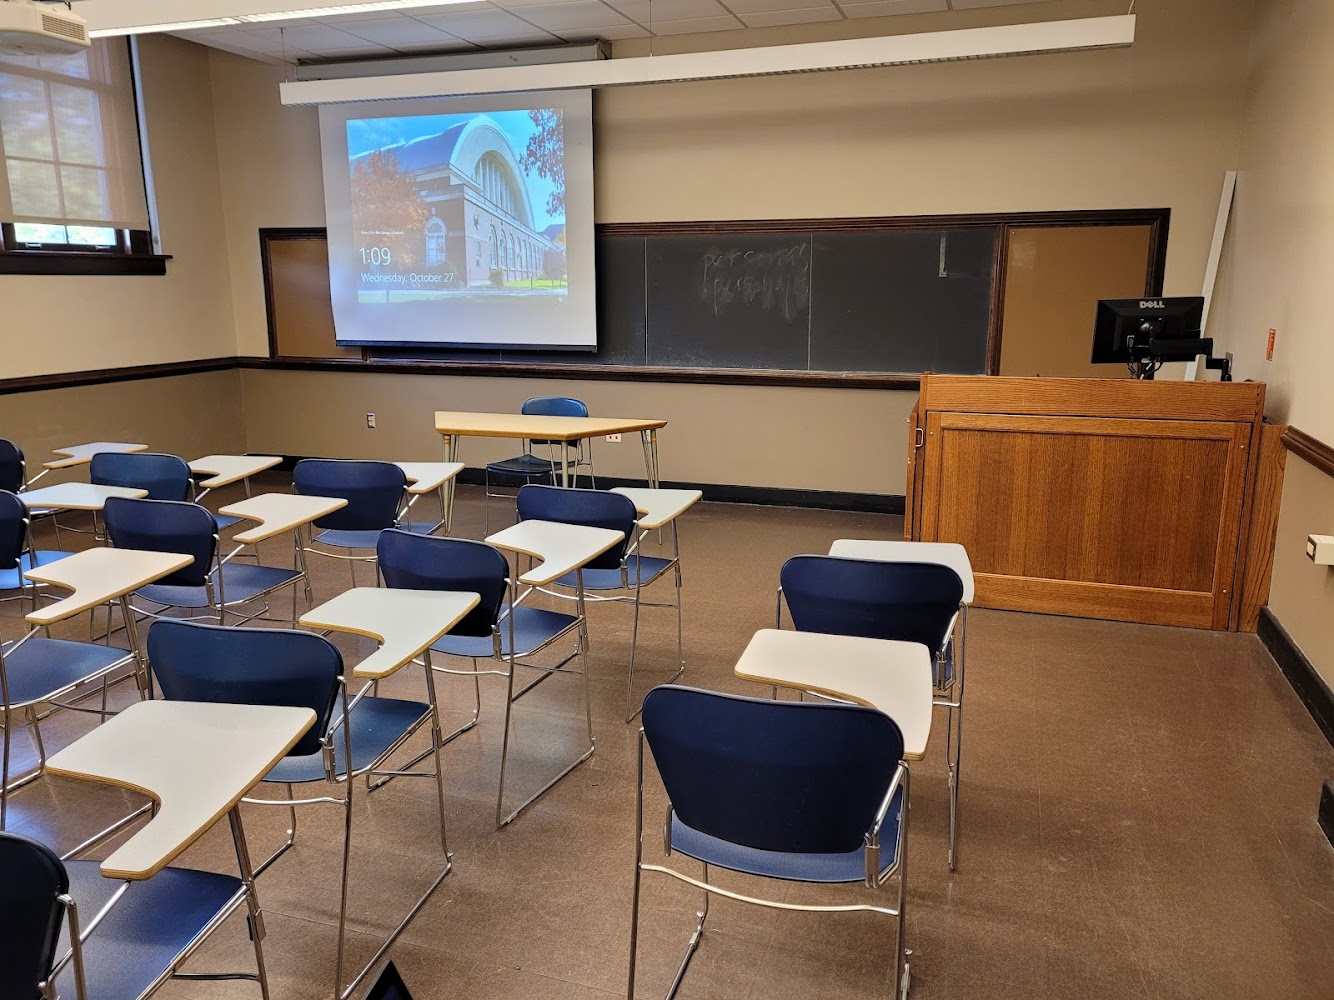 A view of the classroom with movable tableted arm chairs and instructor table in front.